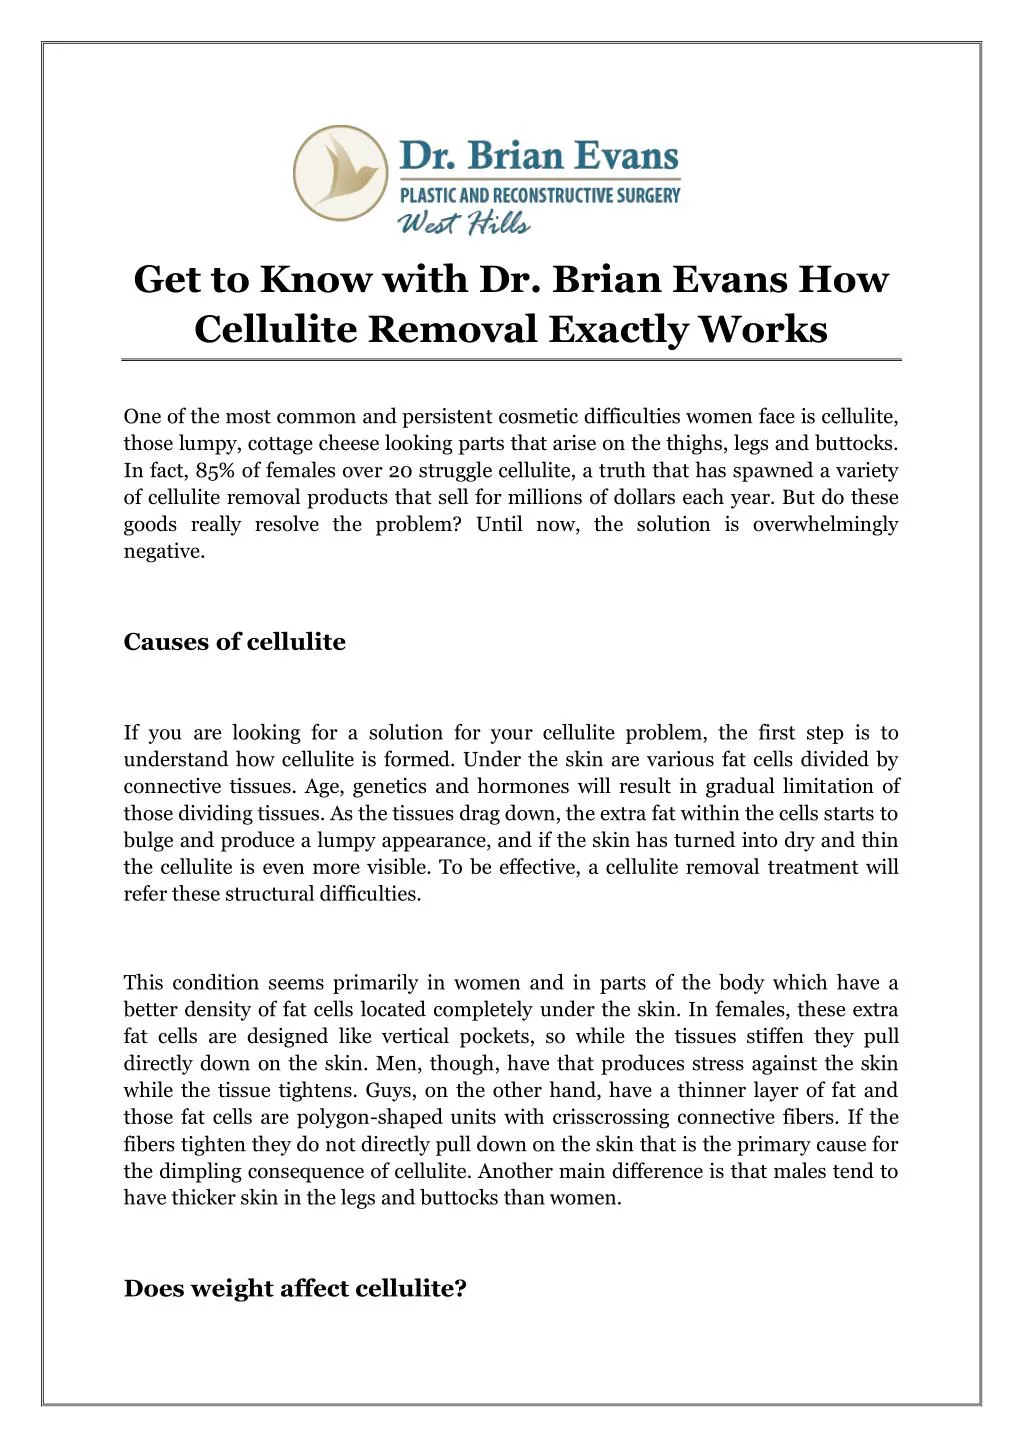 get to know with dr brian evans how cellulite